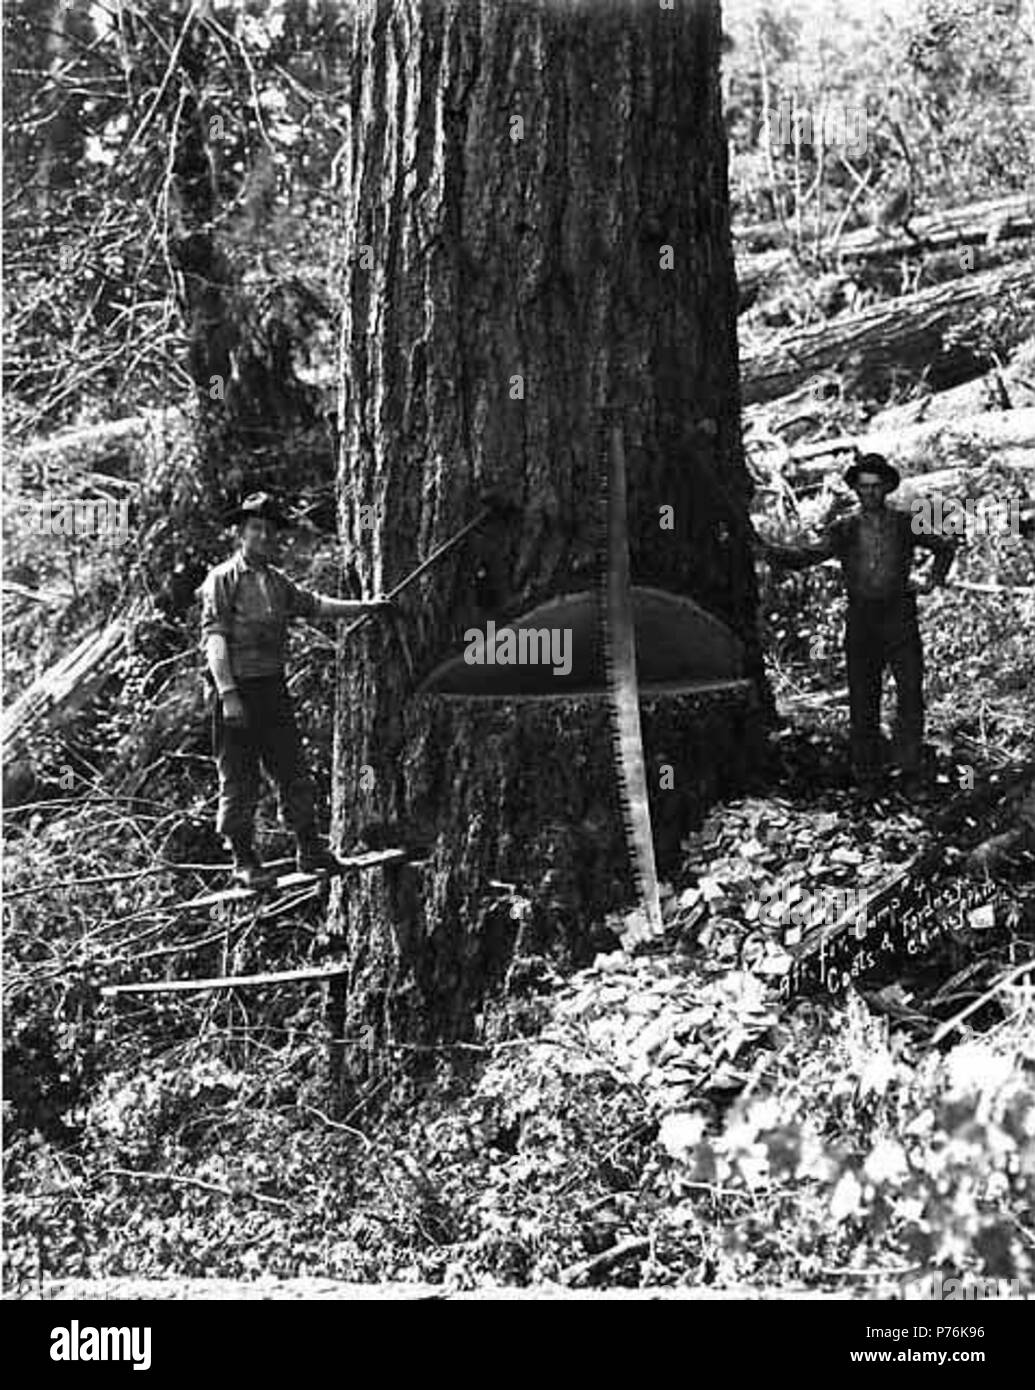 . English: Falling team with tree 9 feet wide, camp 4, Coats-Fordney Lumber Company, near Aberdeen, ca. 1920 . English: Caption on image: 9 ft. fir, Camp #4, Coats & Fordney. C. Kinsey Photo, Seattle. PH Coll 516.624 The Coats-Fordney Lumber Company started out as the A.F. Coats Lumber Company in 1905, headquartered in Aberdeen. It became the Coats-Fordney Lumber Company in 1910, and by 1924, it was called the Donovan-Corkery Lumber Company. Aberdeen is a city in Grays Harbor (formerly called Chehalis) County. The town was platted by Samuel Benn in 1884 on his homestead. Benn was born in New Y Stock Photo